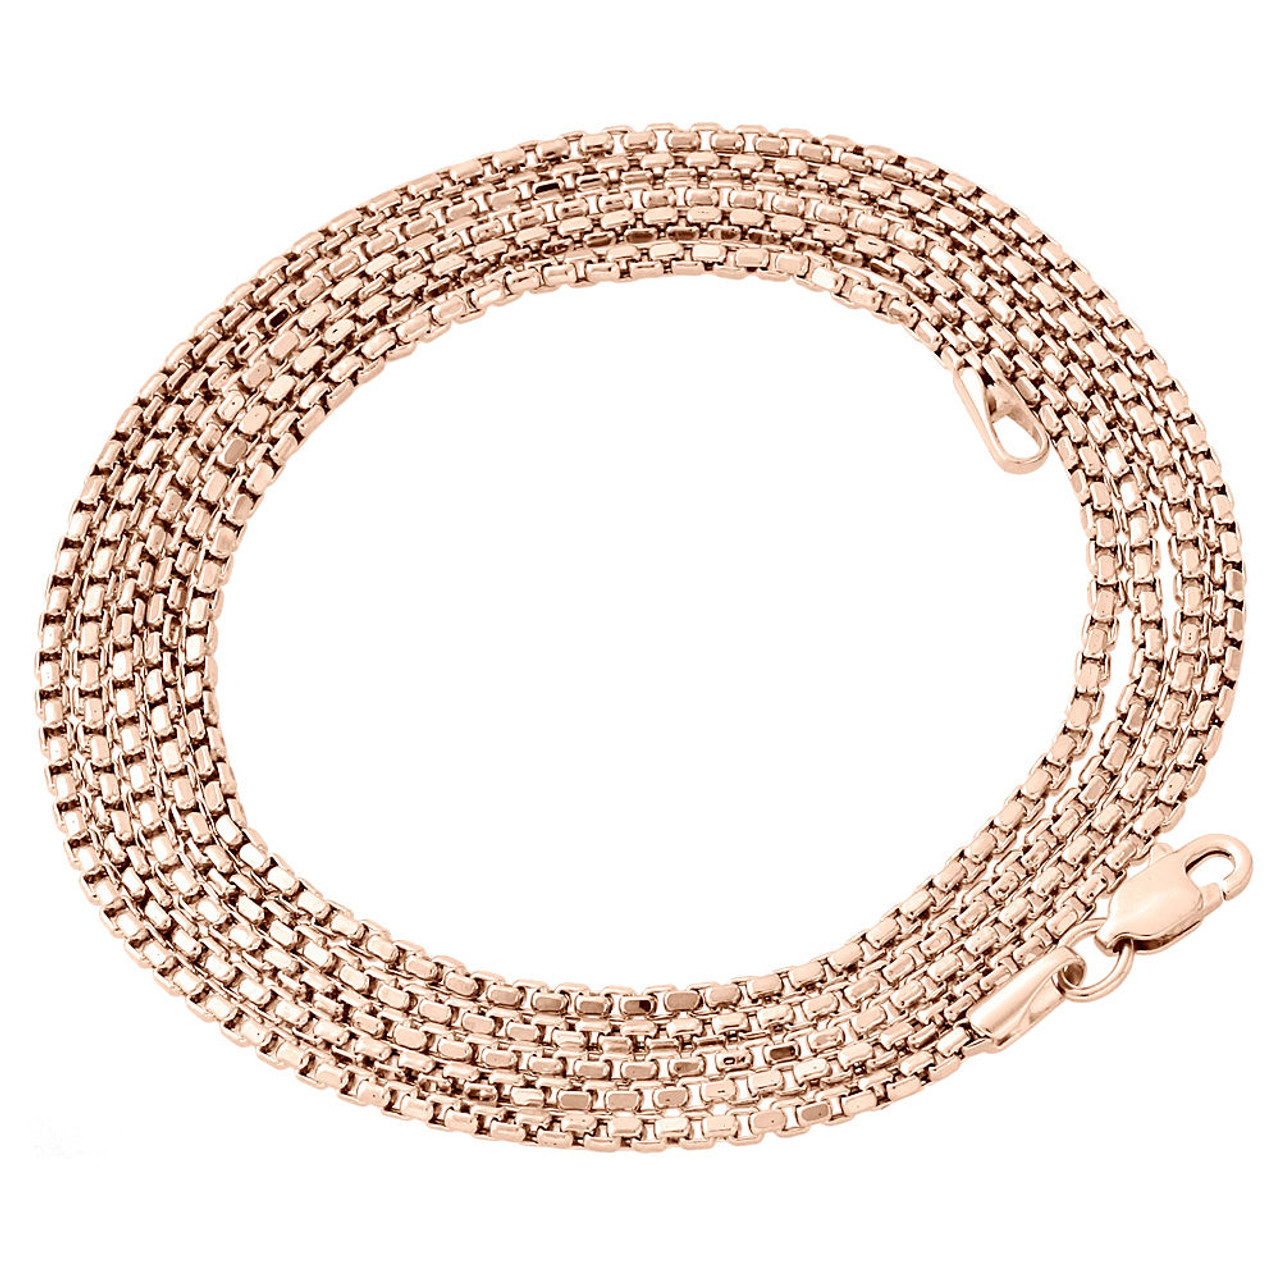 10K Rose Gold 1.5mm Rounded Venetian Box Chain Necklace